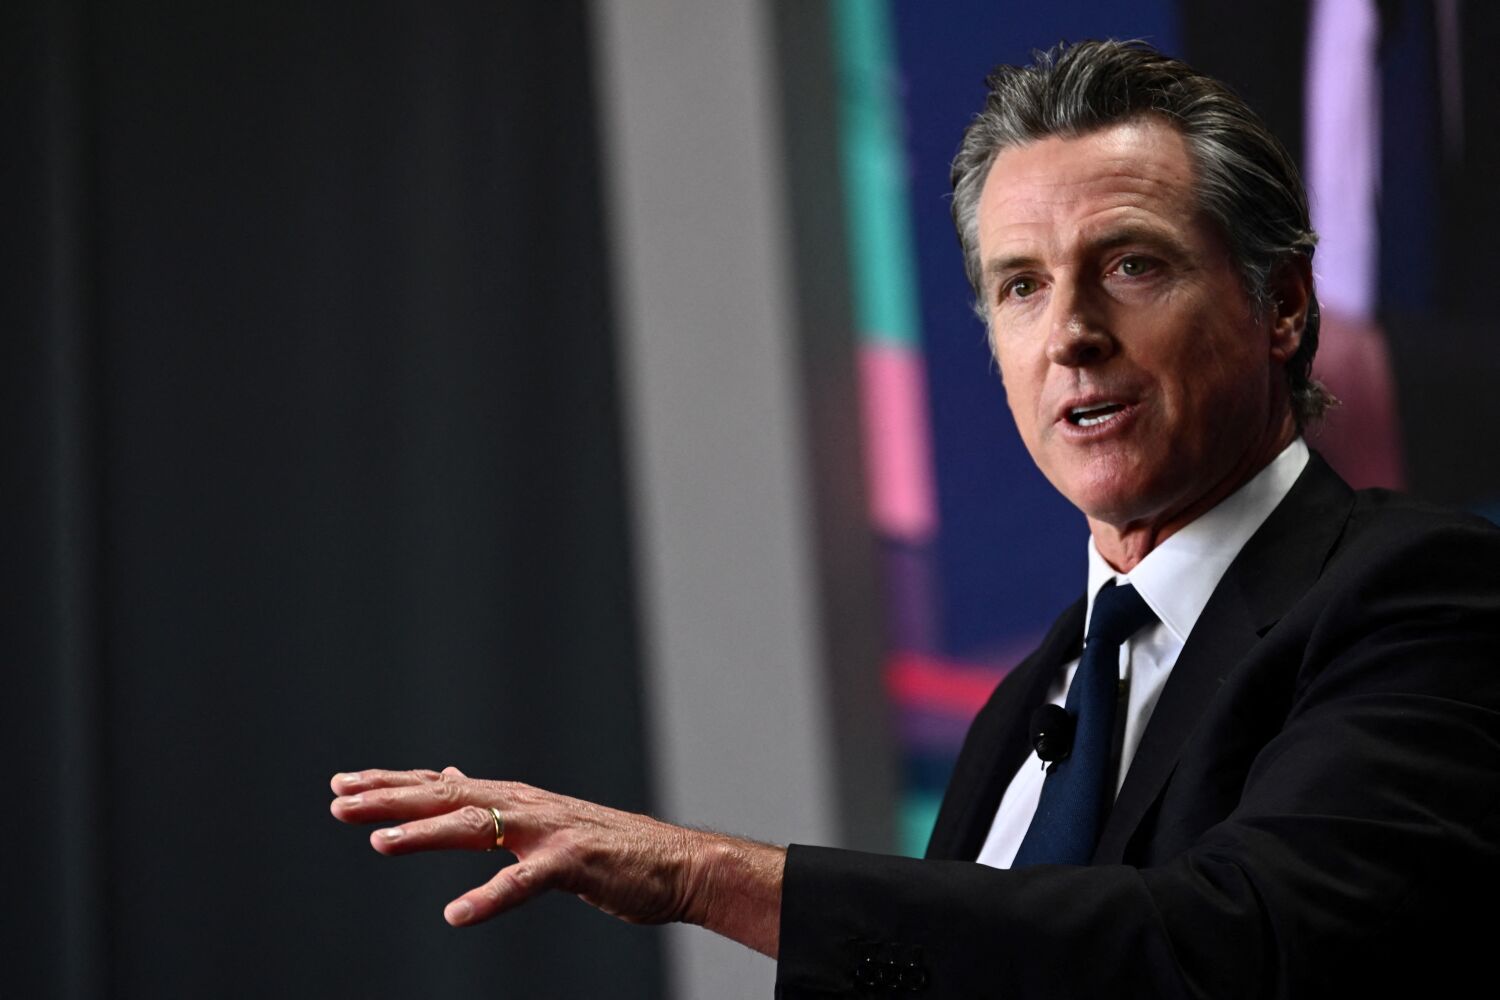 Buried fees, cuts and some gems in Newsom's budget, and thankfully no major tax increase 